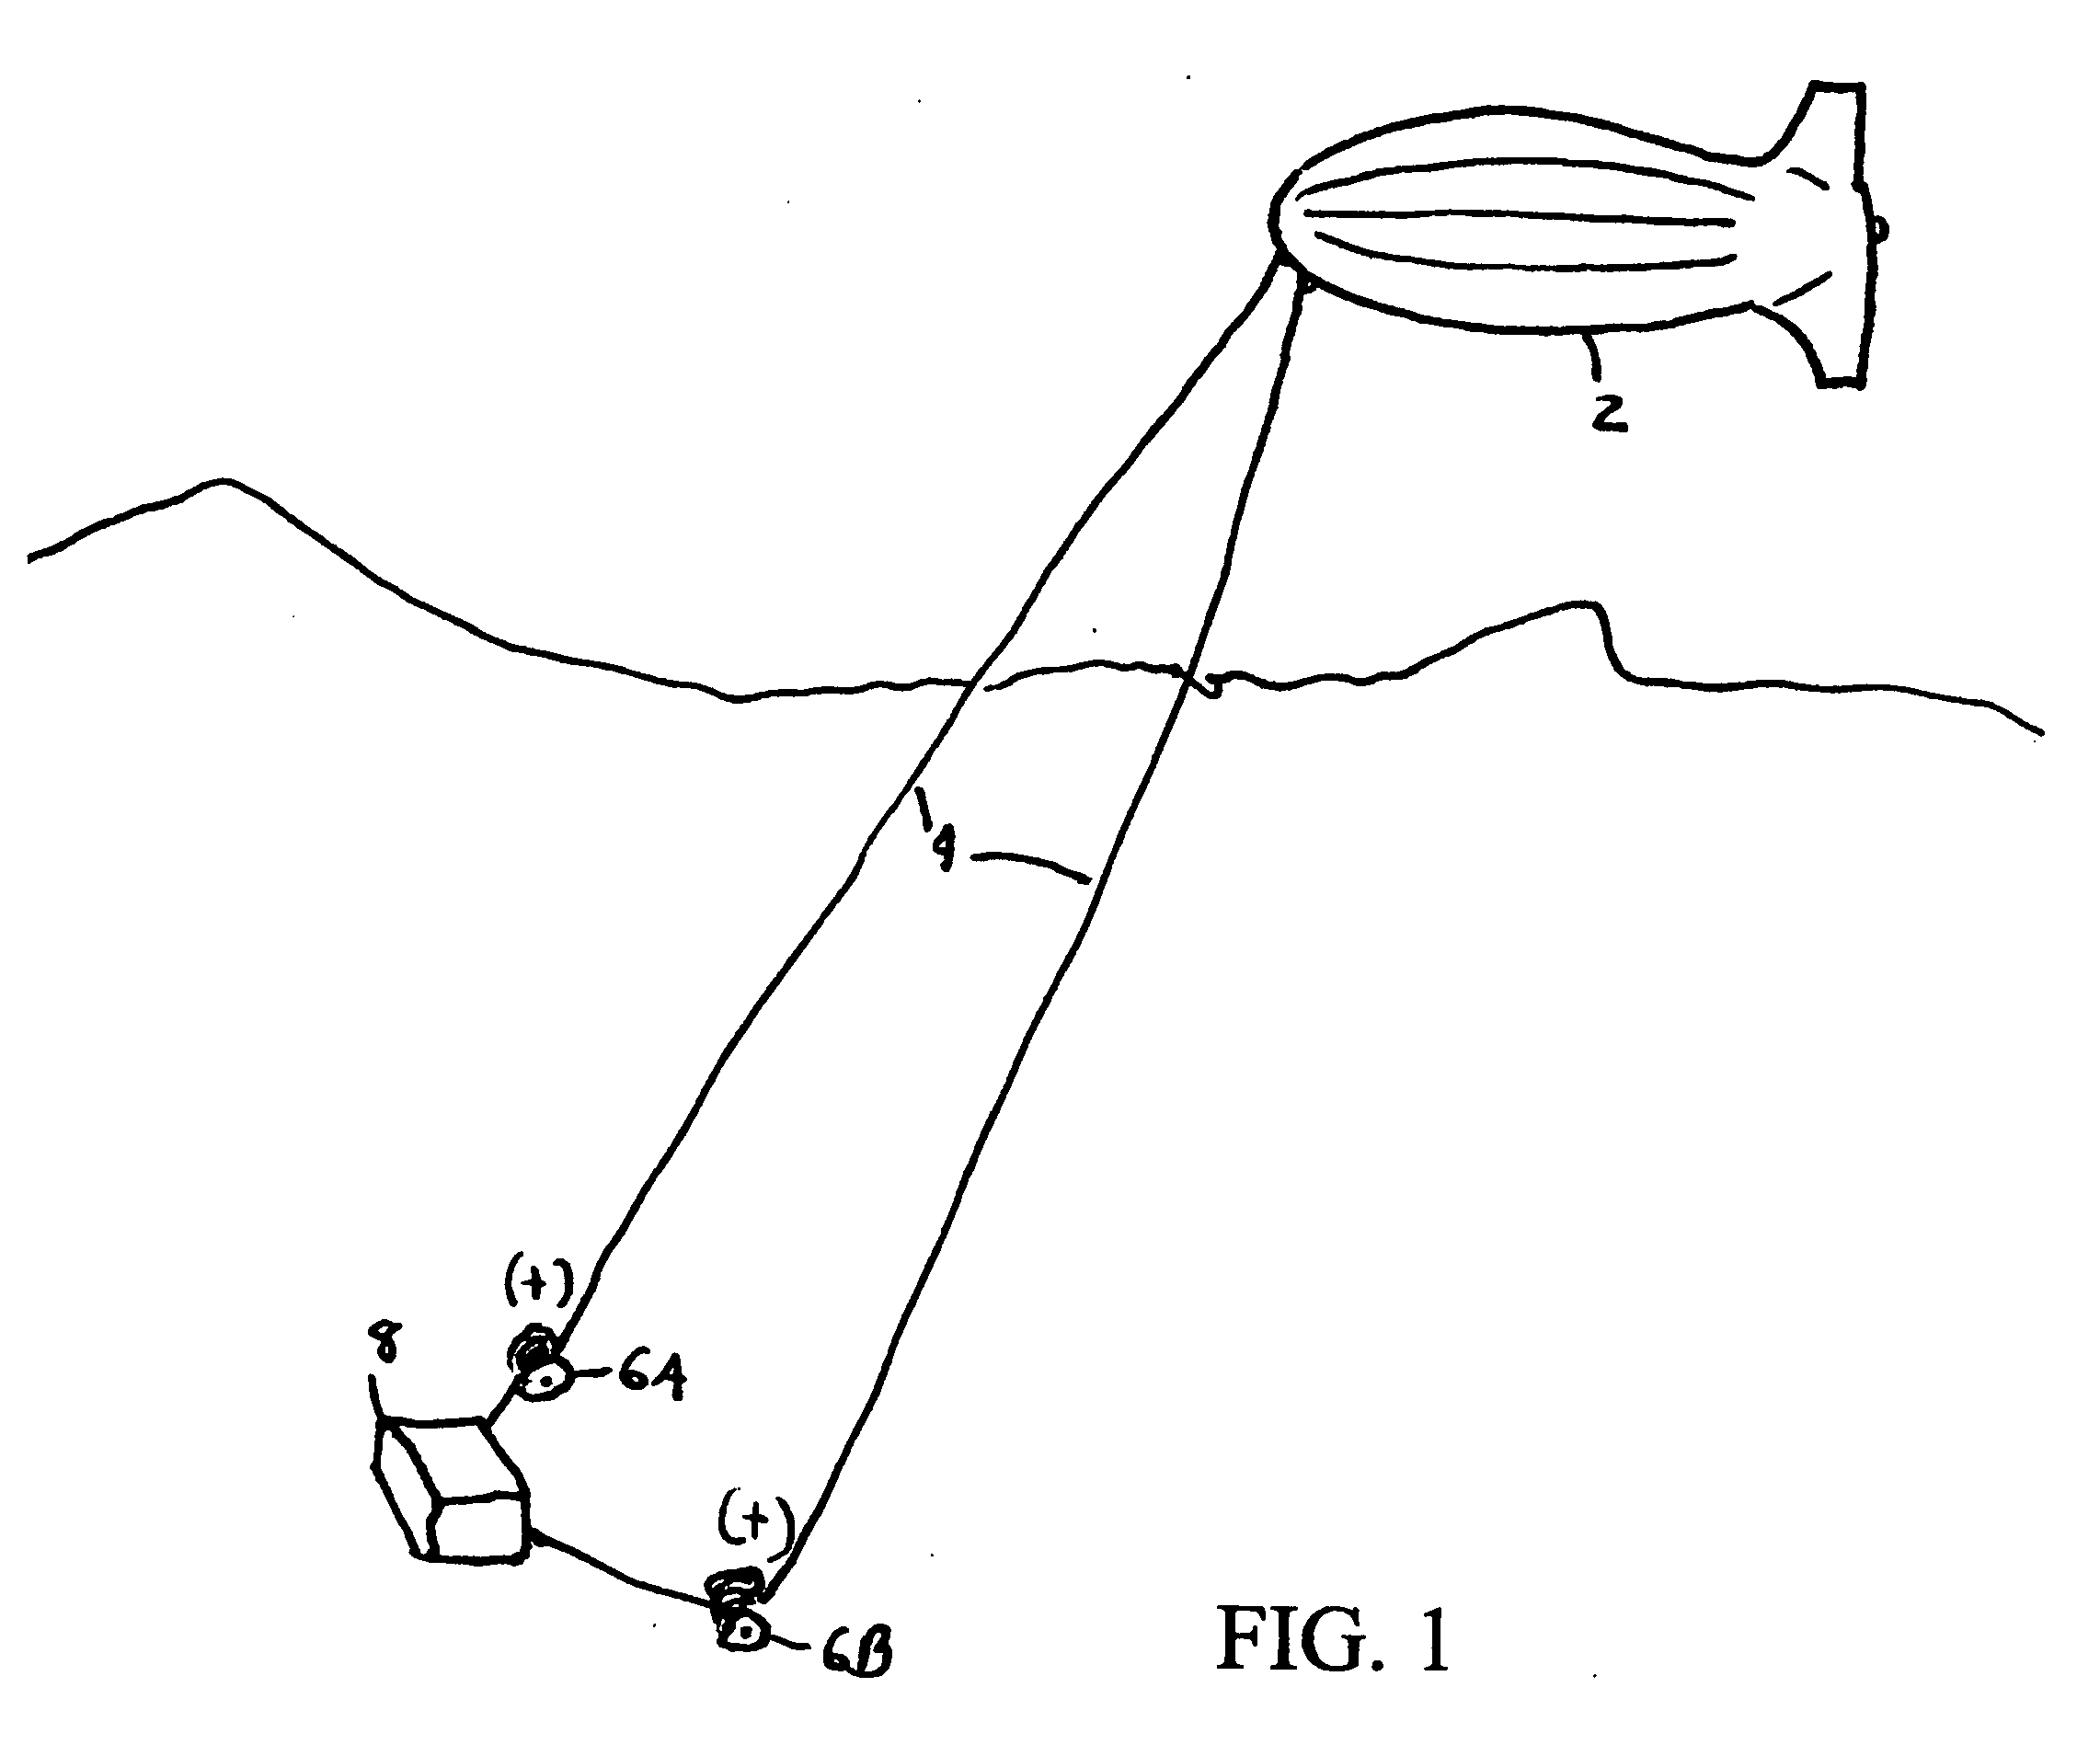 Method of scavenging atmospheric energy, causing rainfall, and for dissipating severe weather formations using an electrostatic dirigible